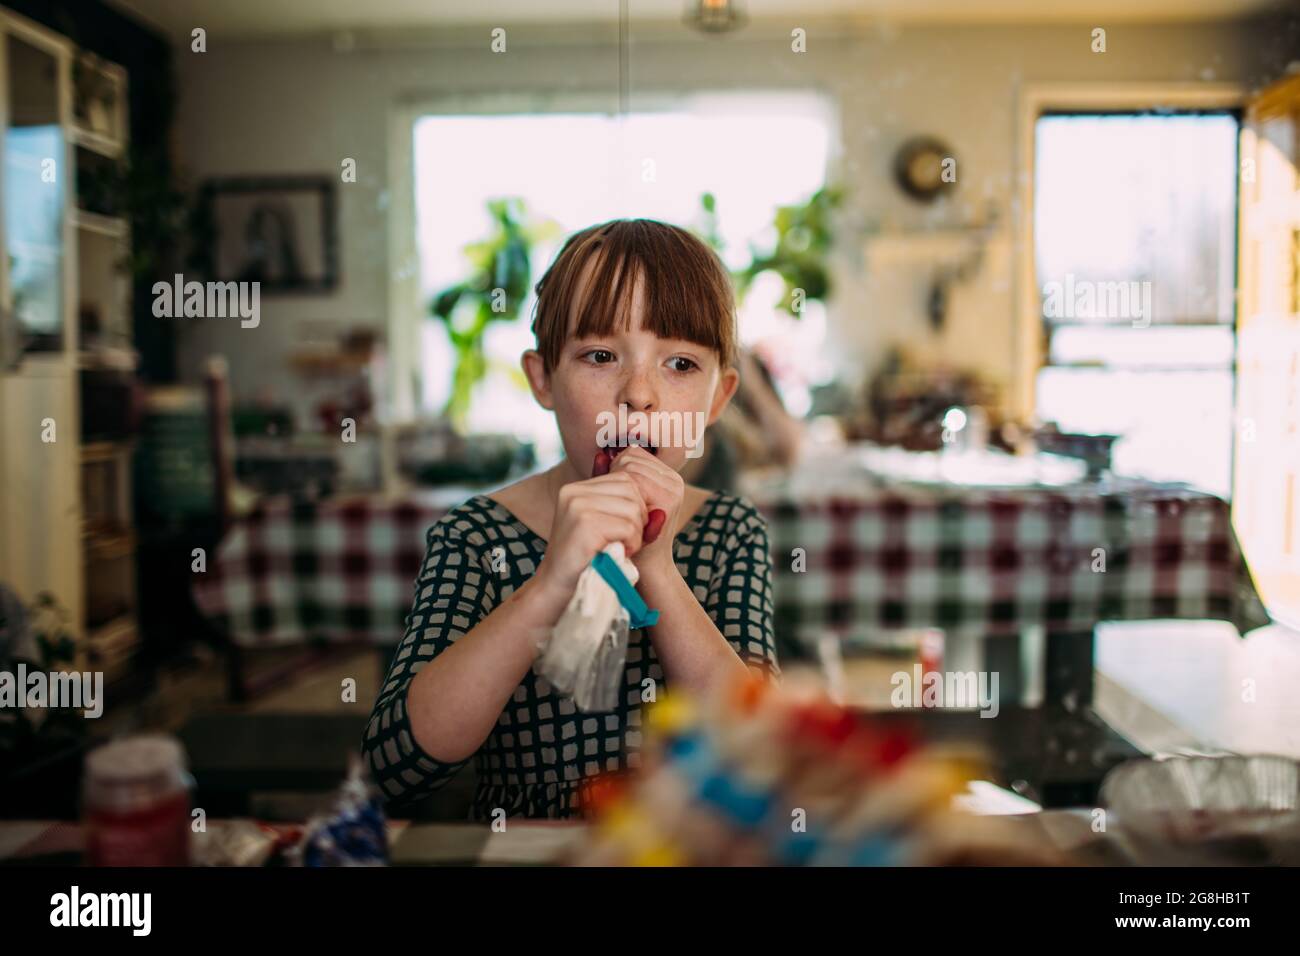 Young girl licking icing from bag while decorating cookies Stock Photo